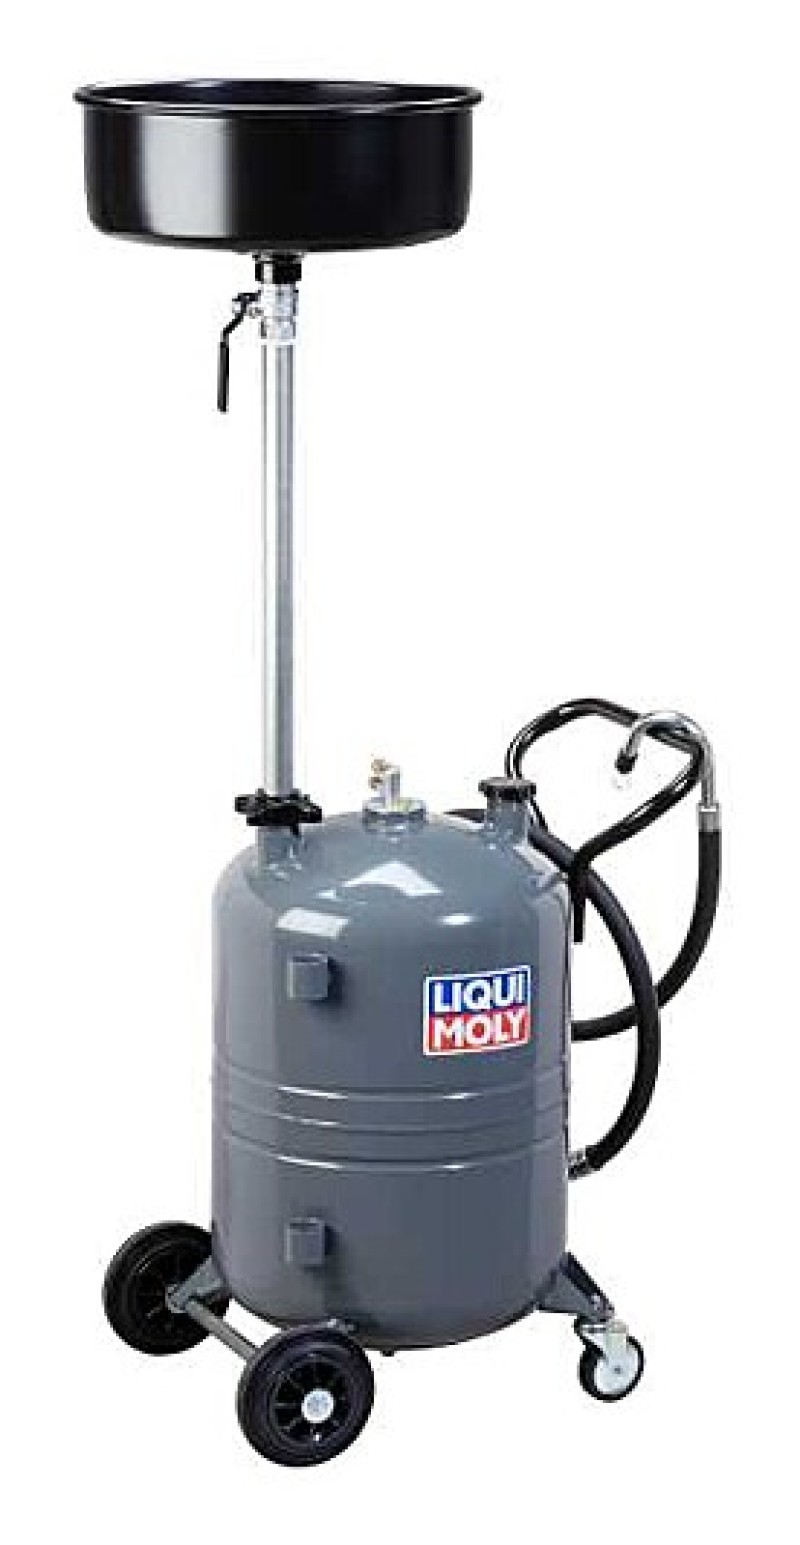 LIQUI MOLY Waste Oil Collecting Tank - 7810